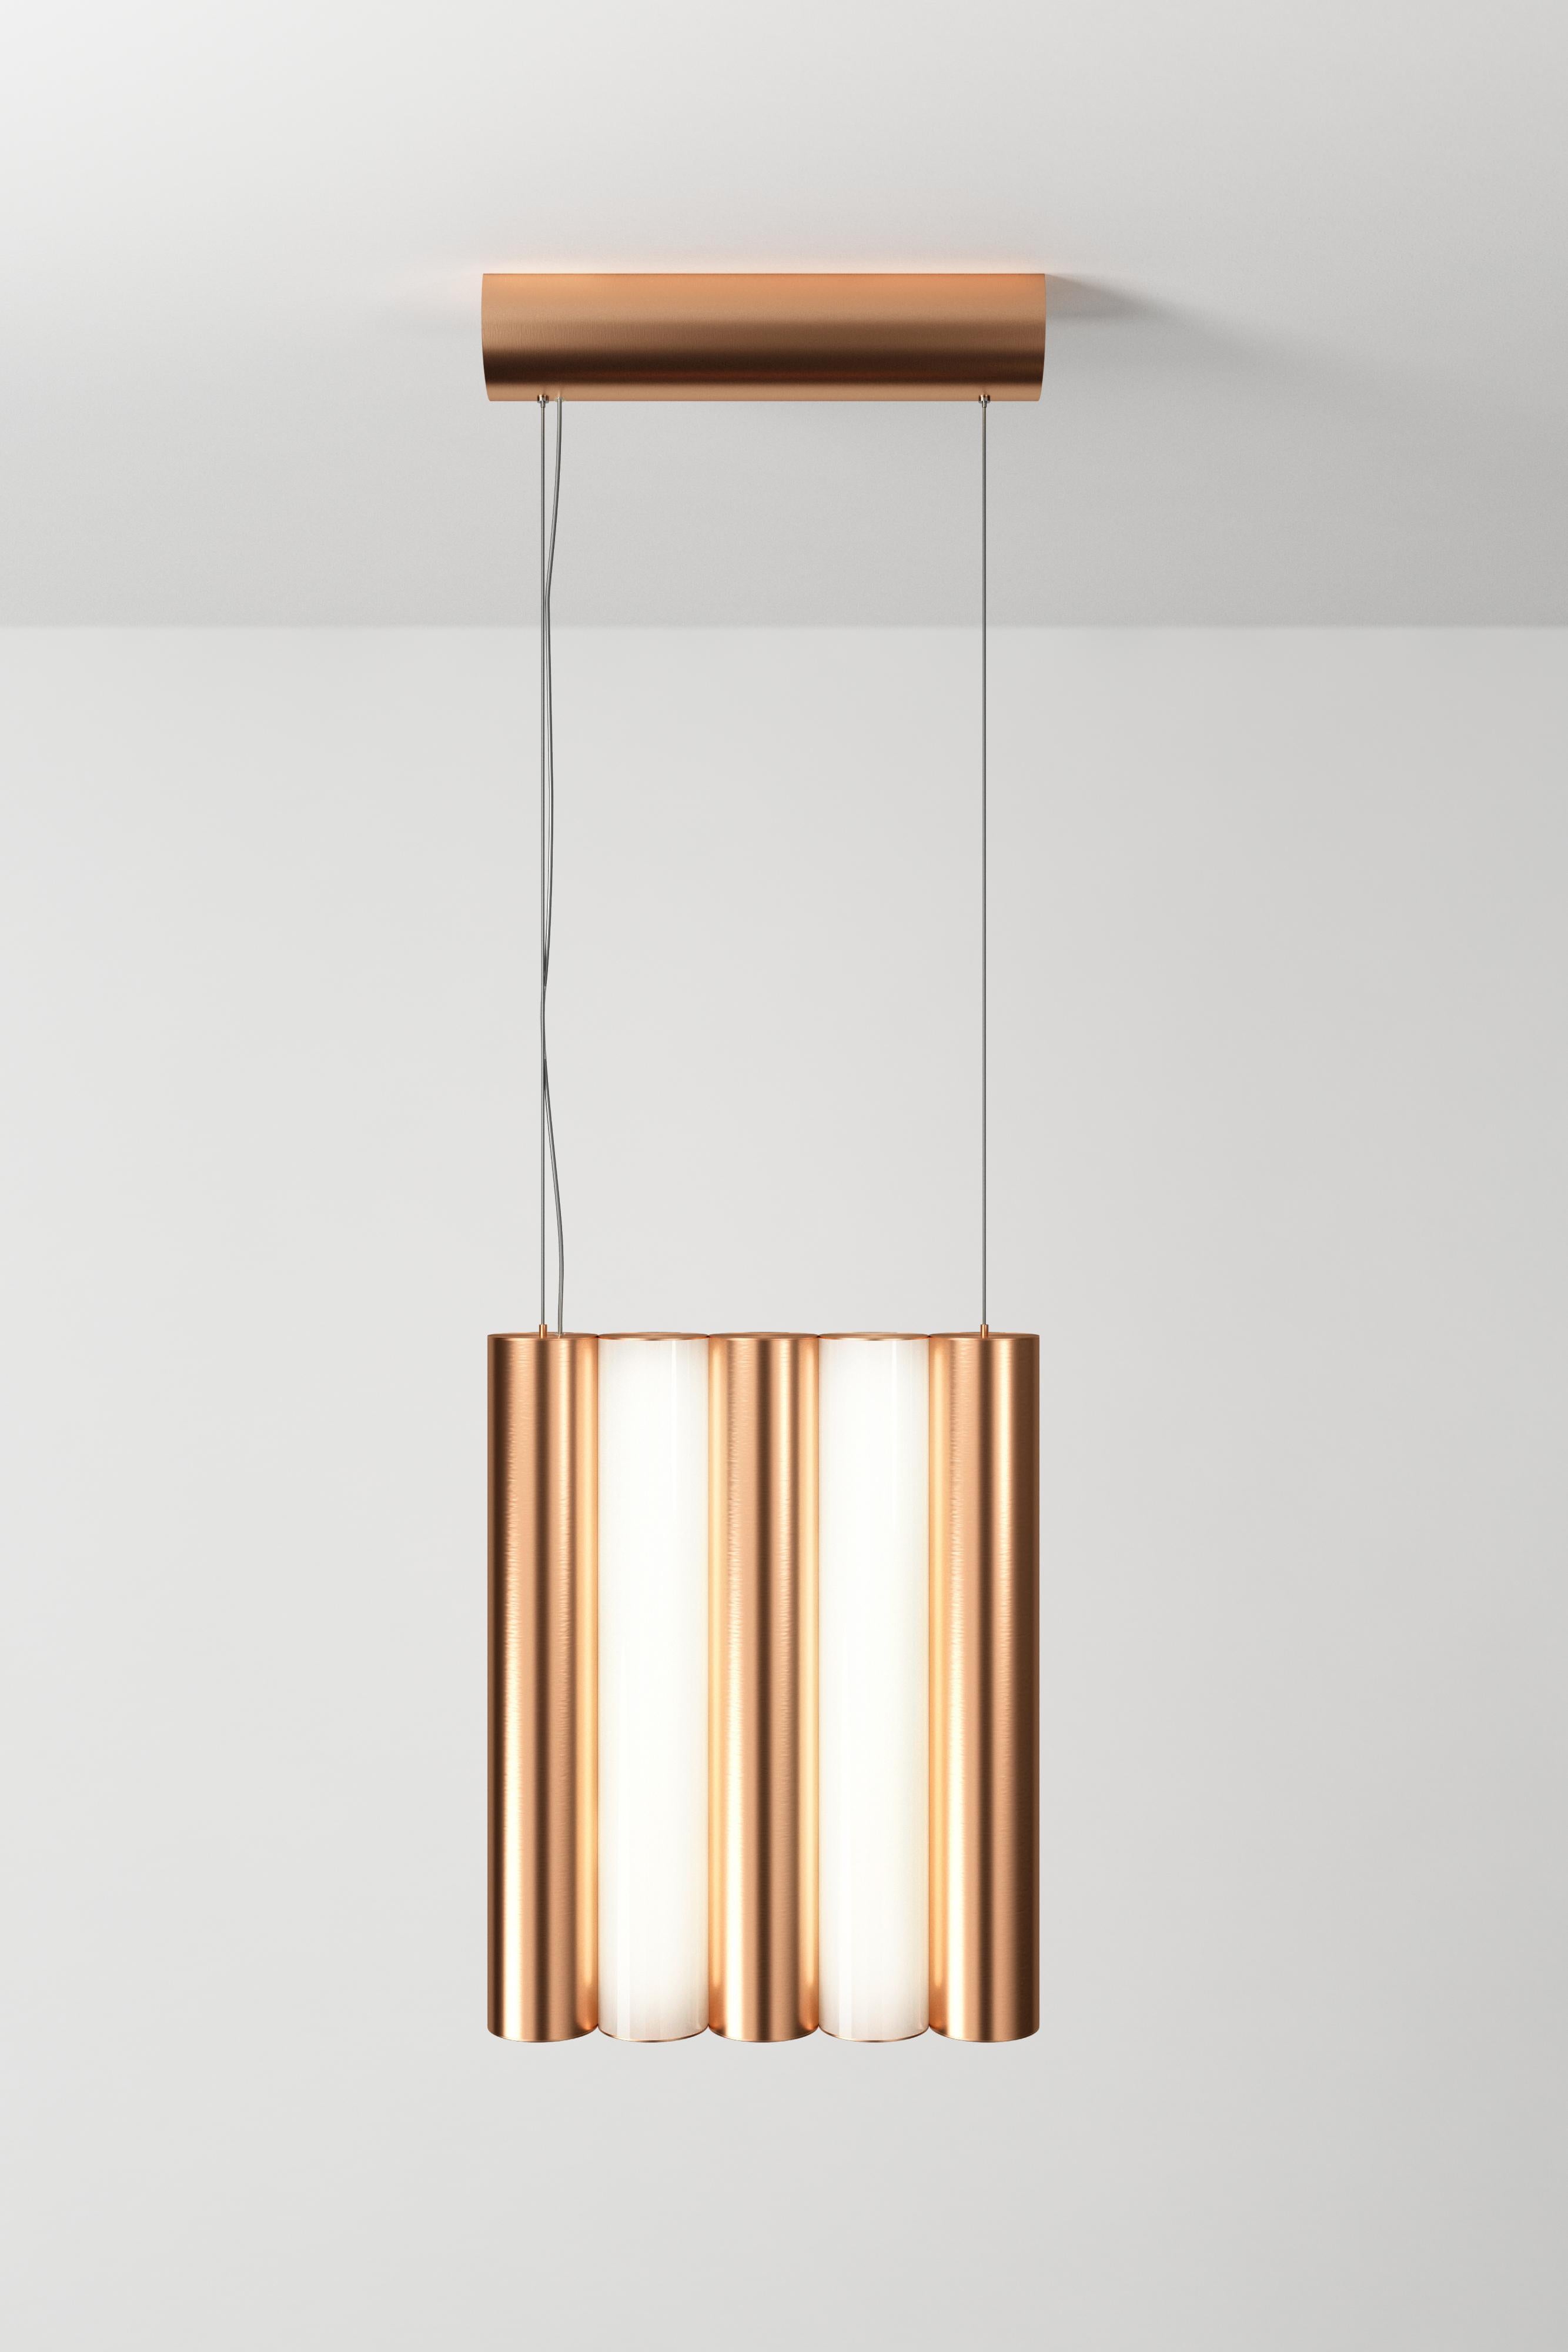 Gamma L5 copper pendant by Sylvain Willenz
Dimensions: D 25 x W 5 X H 42.3 cm
Materials: solid brass, white polycarbonate diffuser, metal cable and transparent electric cable.
Others finishes and dimensions are available. 

All our lamps can be